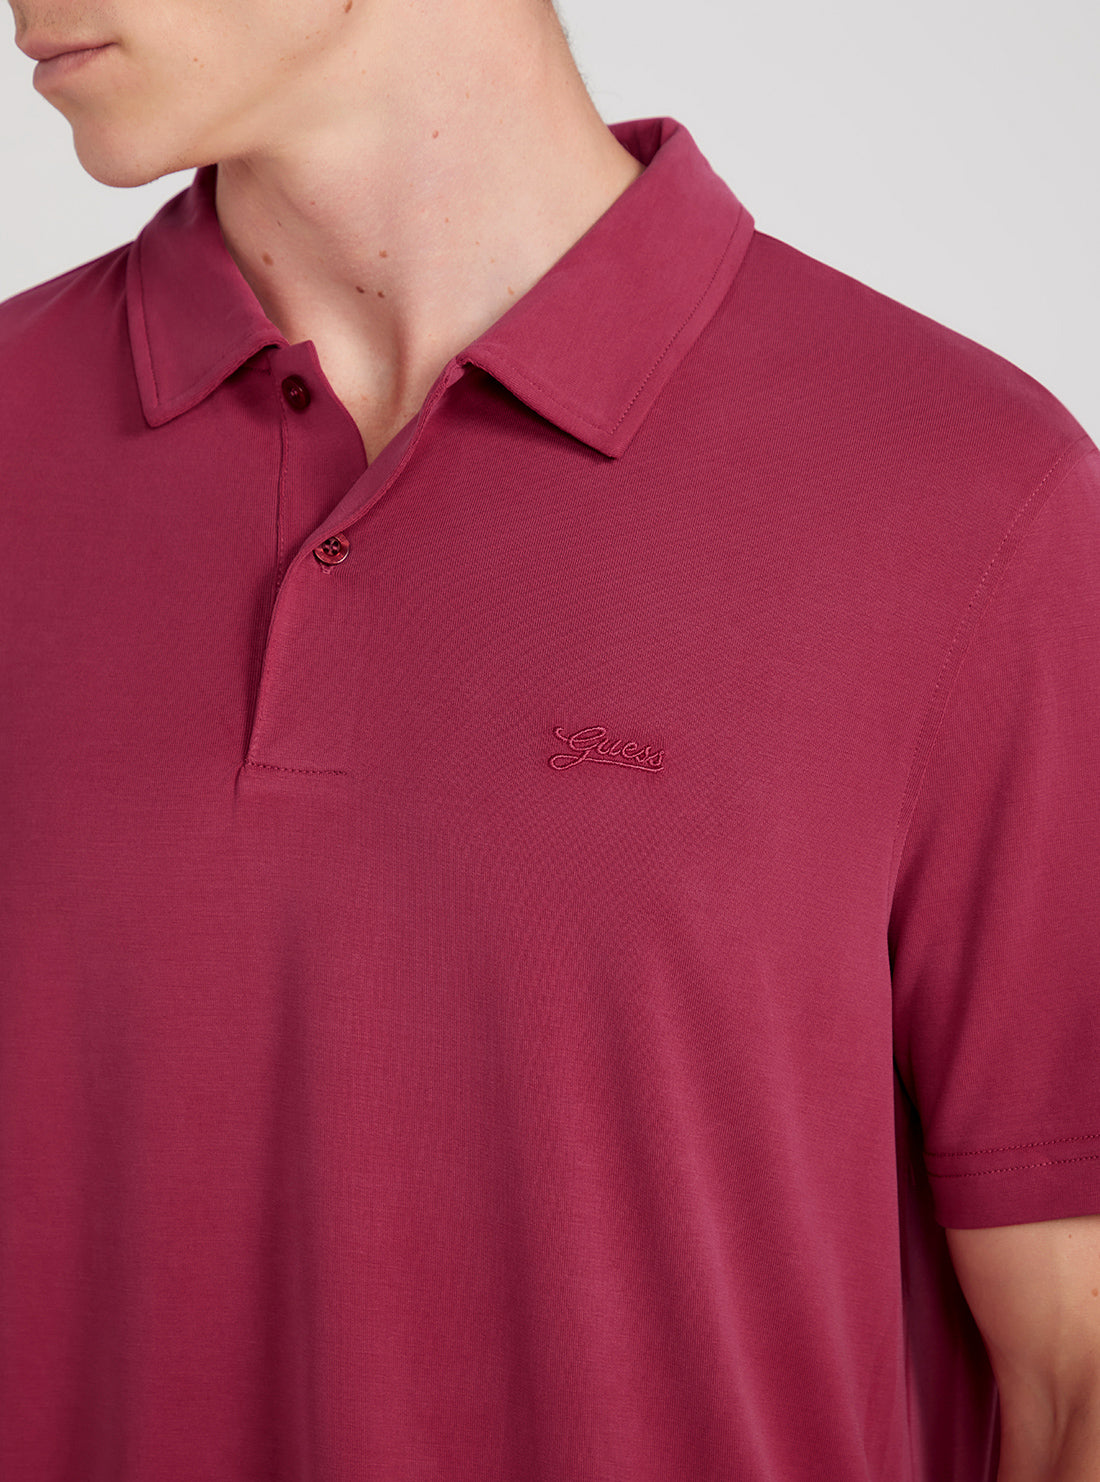 GUESS Eco Red Short Sleeve Polo T-Shirt detail view